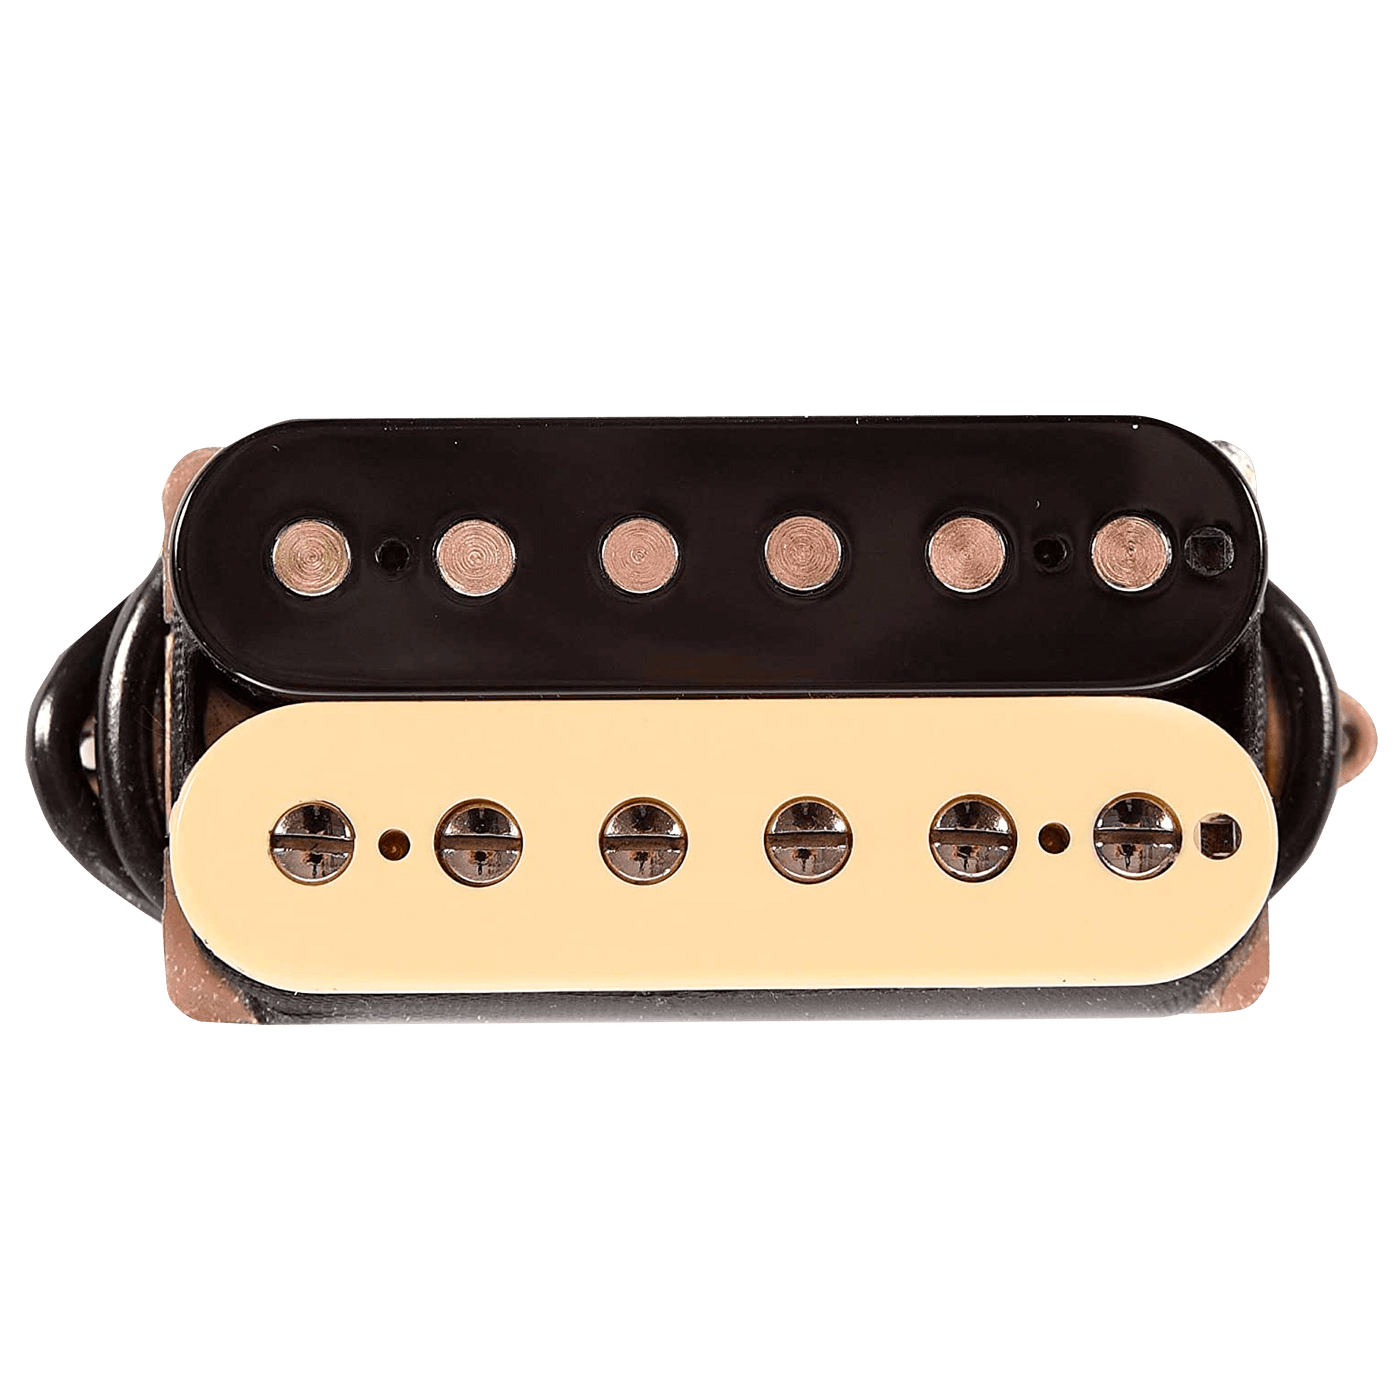 Suhr Thornbucker Signature Humbucker Zebra (Neck) - $169990 - Gearhub - Suhr“We are happy to introduce the new Thornbucker + bridge pickup. It retains all the clarity, warmth, character, and mojo of the original Thornbuckers, and adds a bit more power and oomph. Great for players that like a slightly overwound PAF-type tone!”. “We’re overjoyed with the enthusiasm from players for the Thornbucker humbucking pickups! The pickups have been a resounding success, garnering praise for their extraordinary tone and